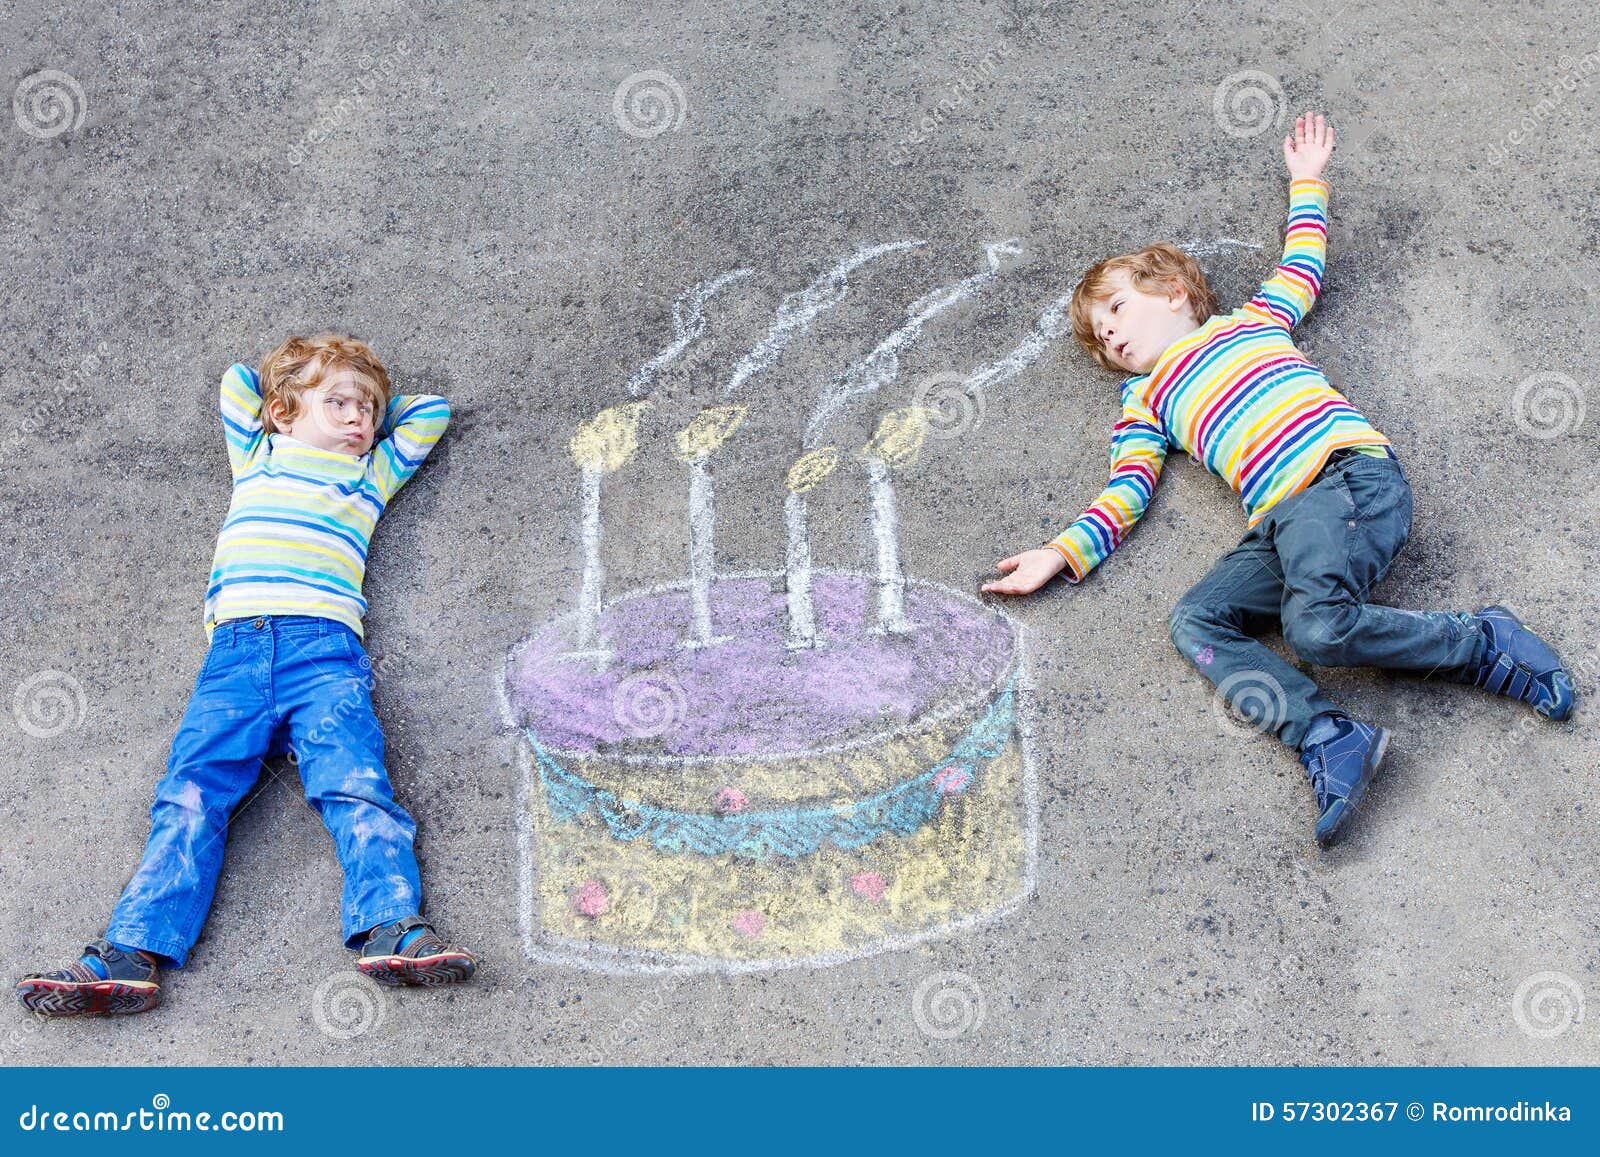 Update 136+ cake drawing for kids